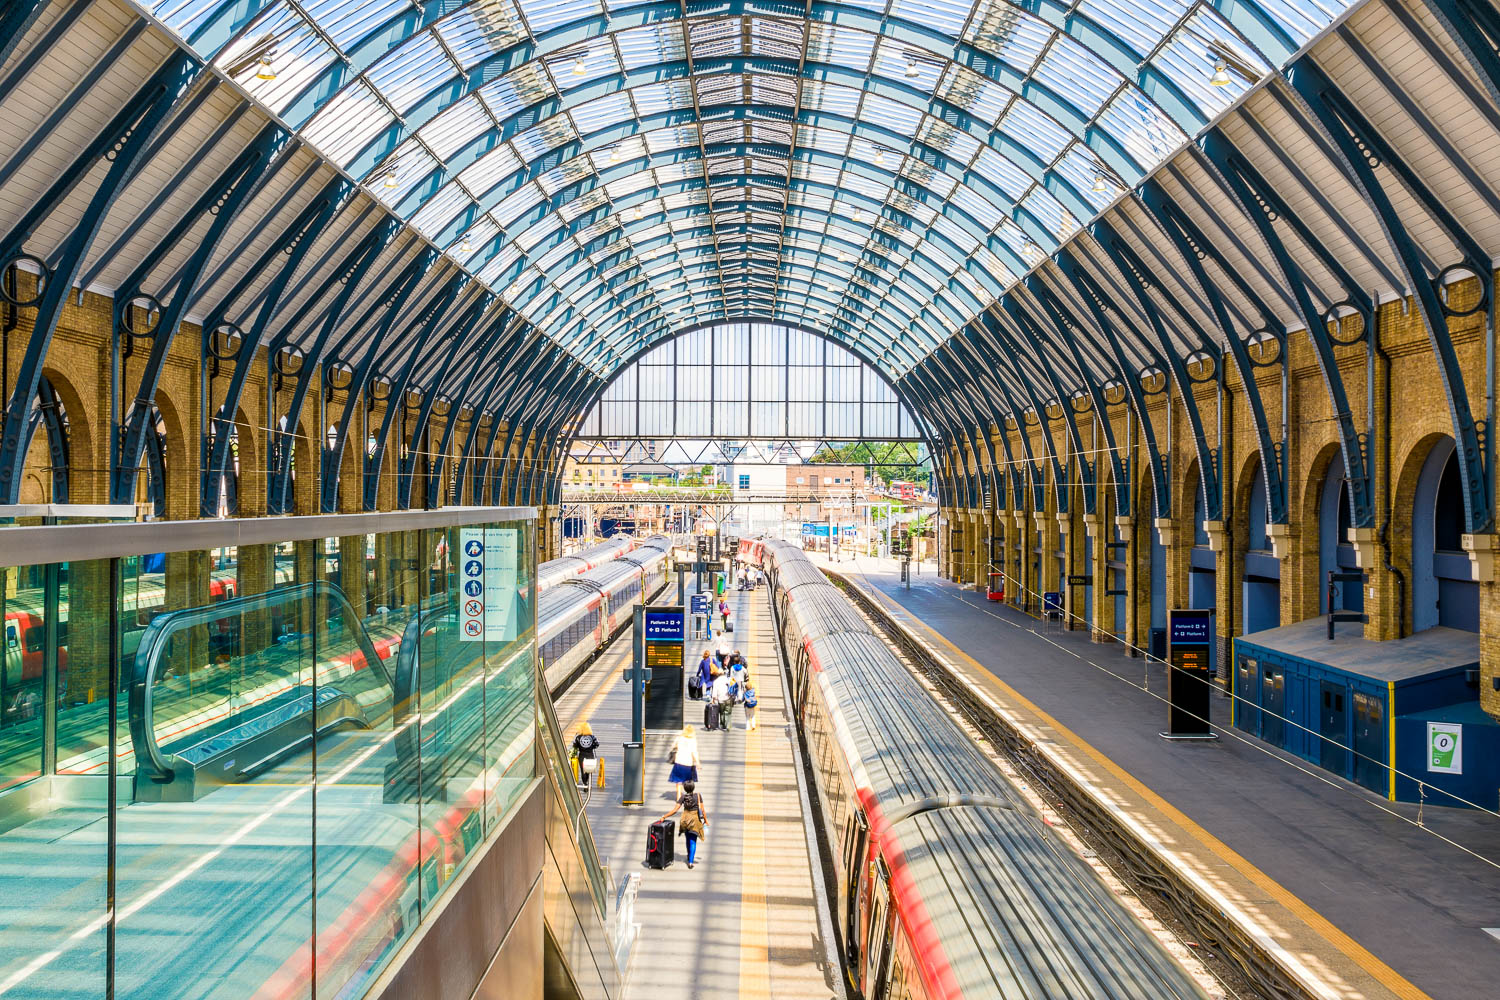 View of platforms at Kings Cross station in London, looking down at the trains under the curved glass roof - one of several major rail stations if you're travelling with London with kids